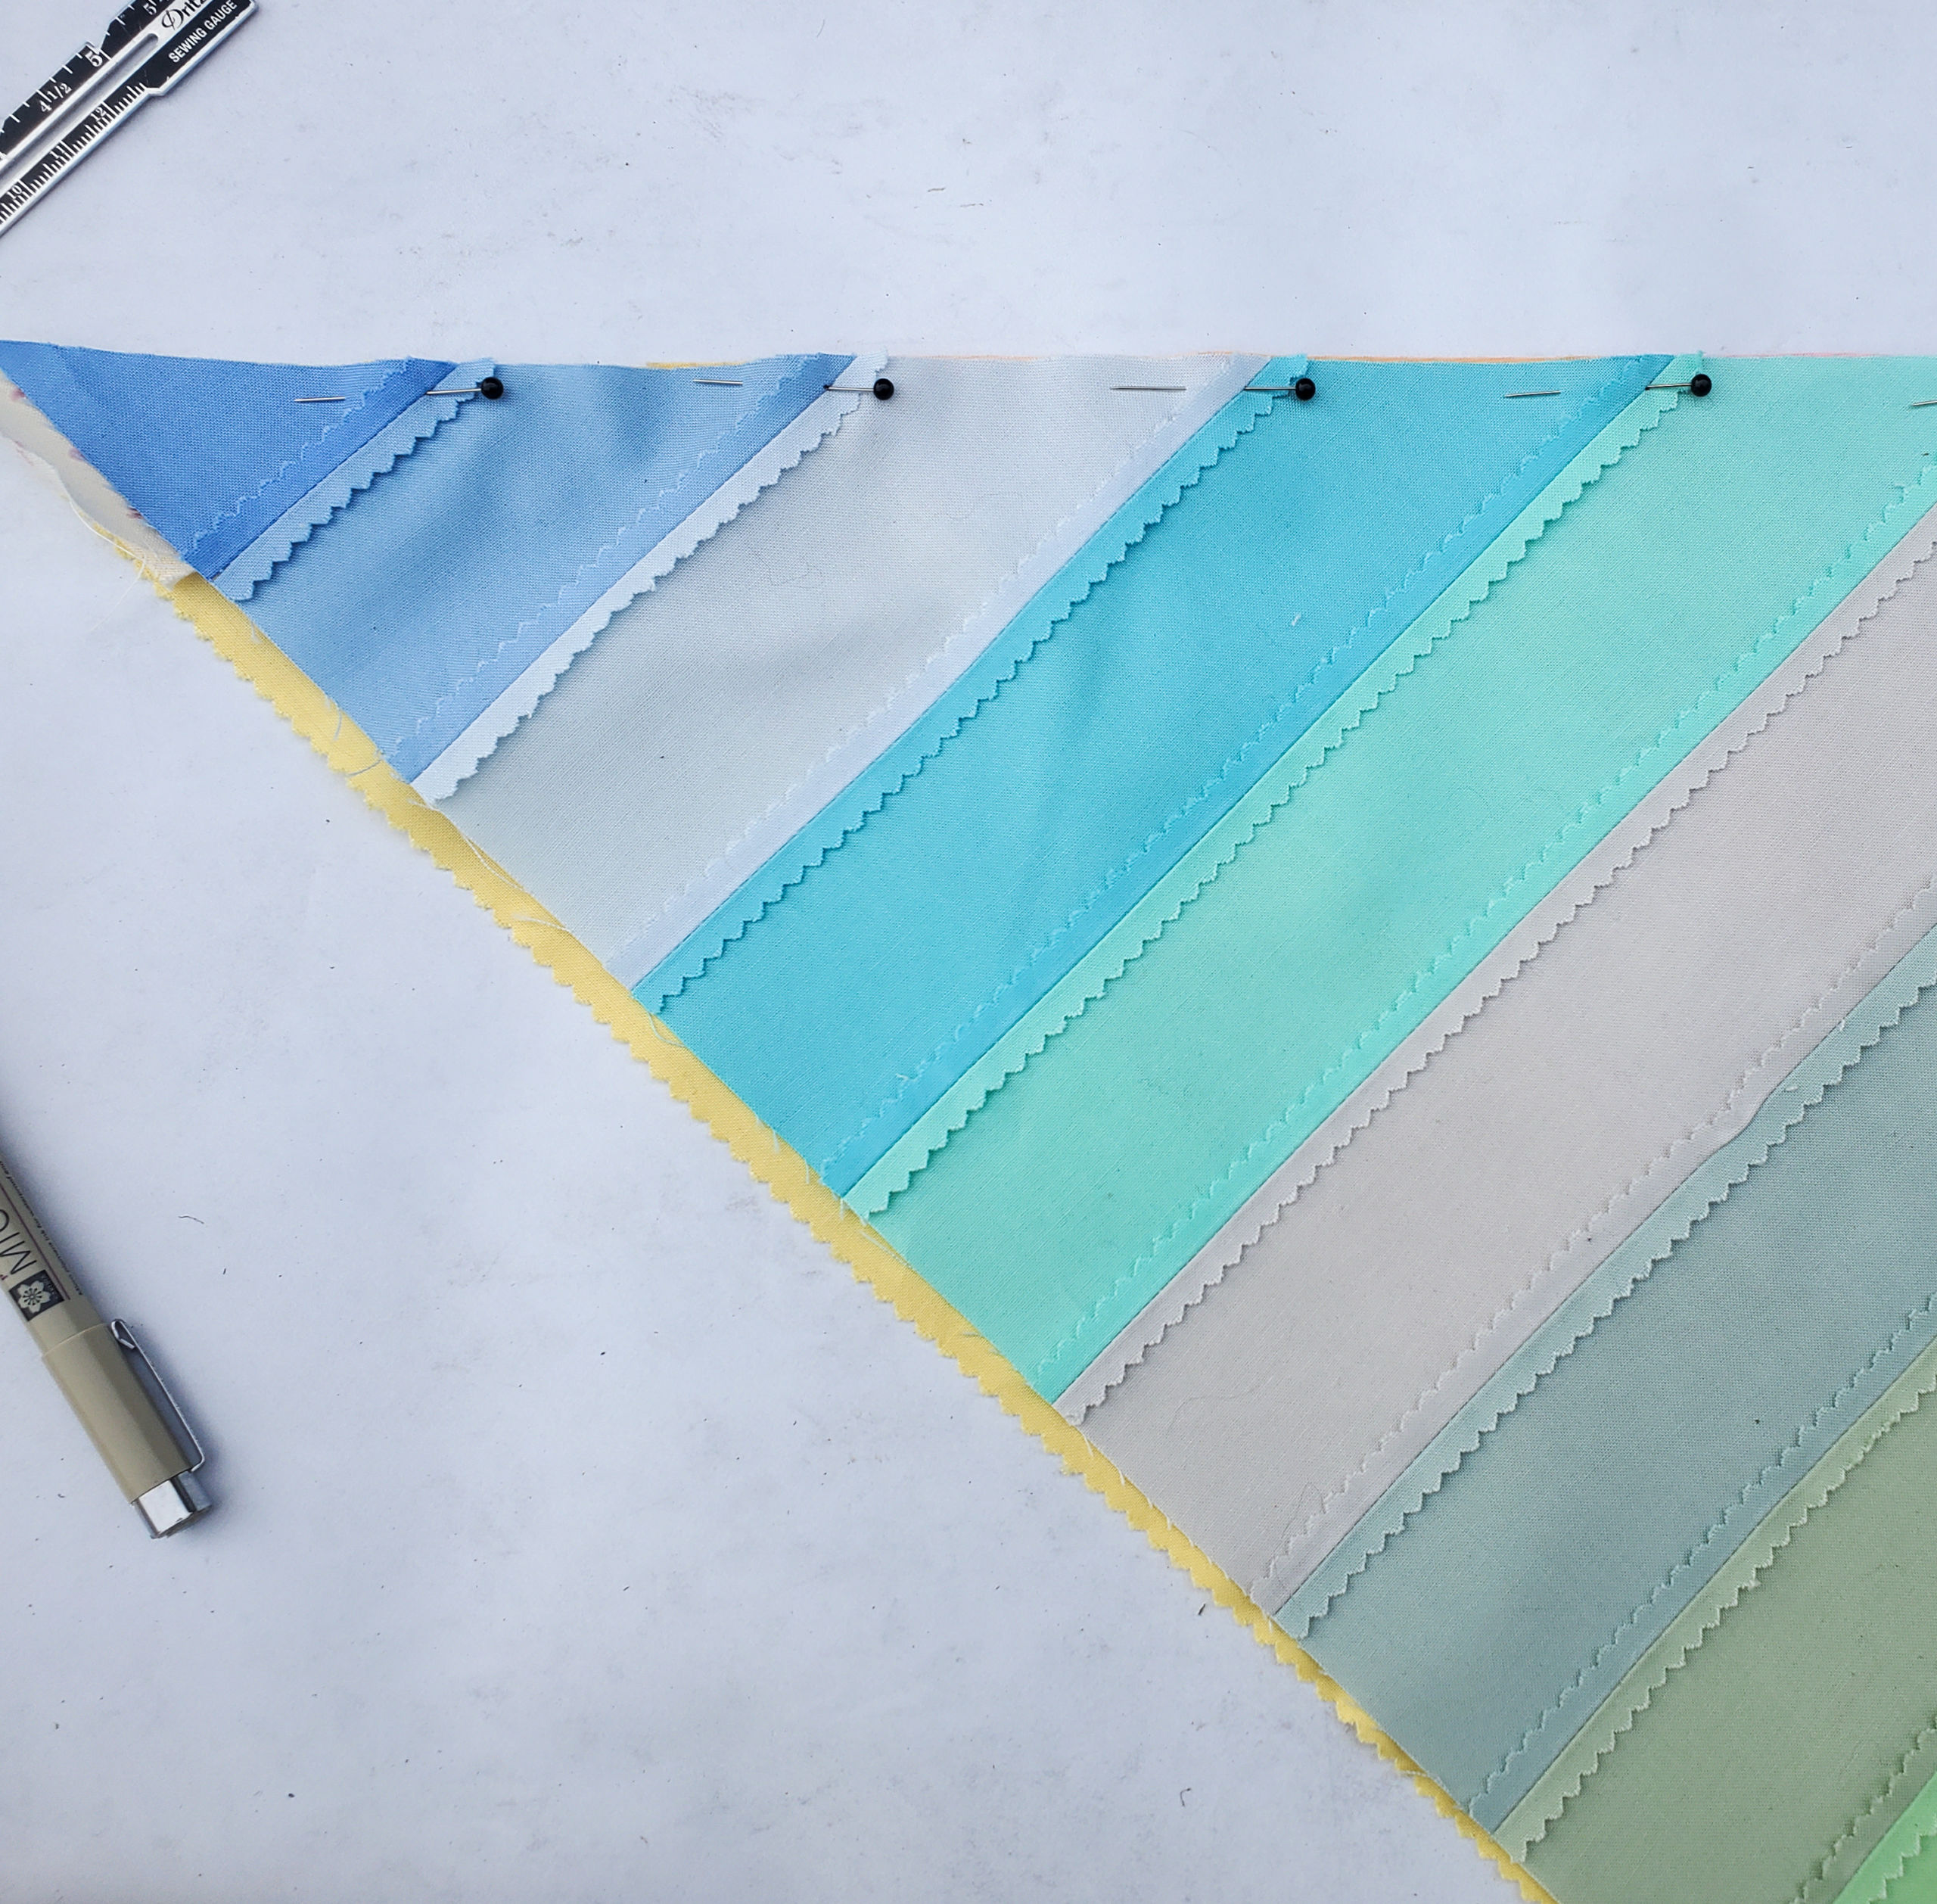 How to make a patchwork bandana with the leftover scraps from the Adventureland quilt pattern. This bandana tutorial is fast and easy! suzyquilts.com #bandana #sewingtutorial